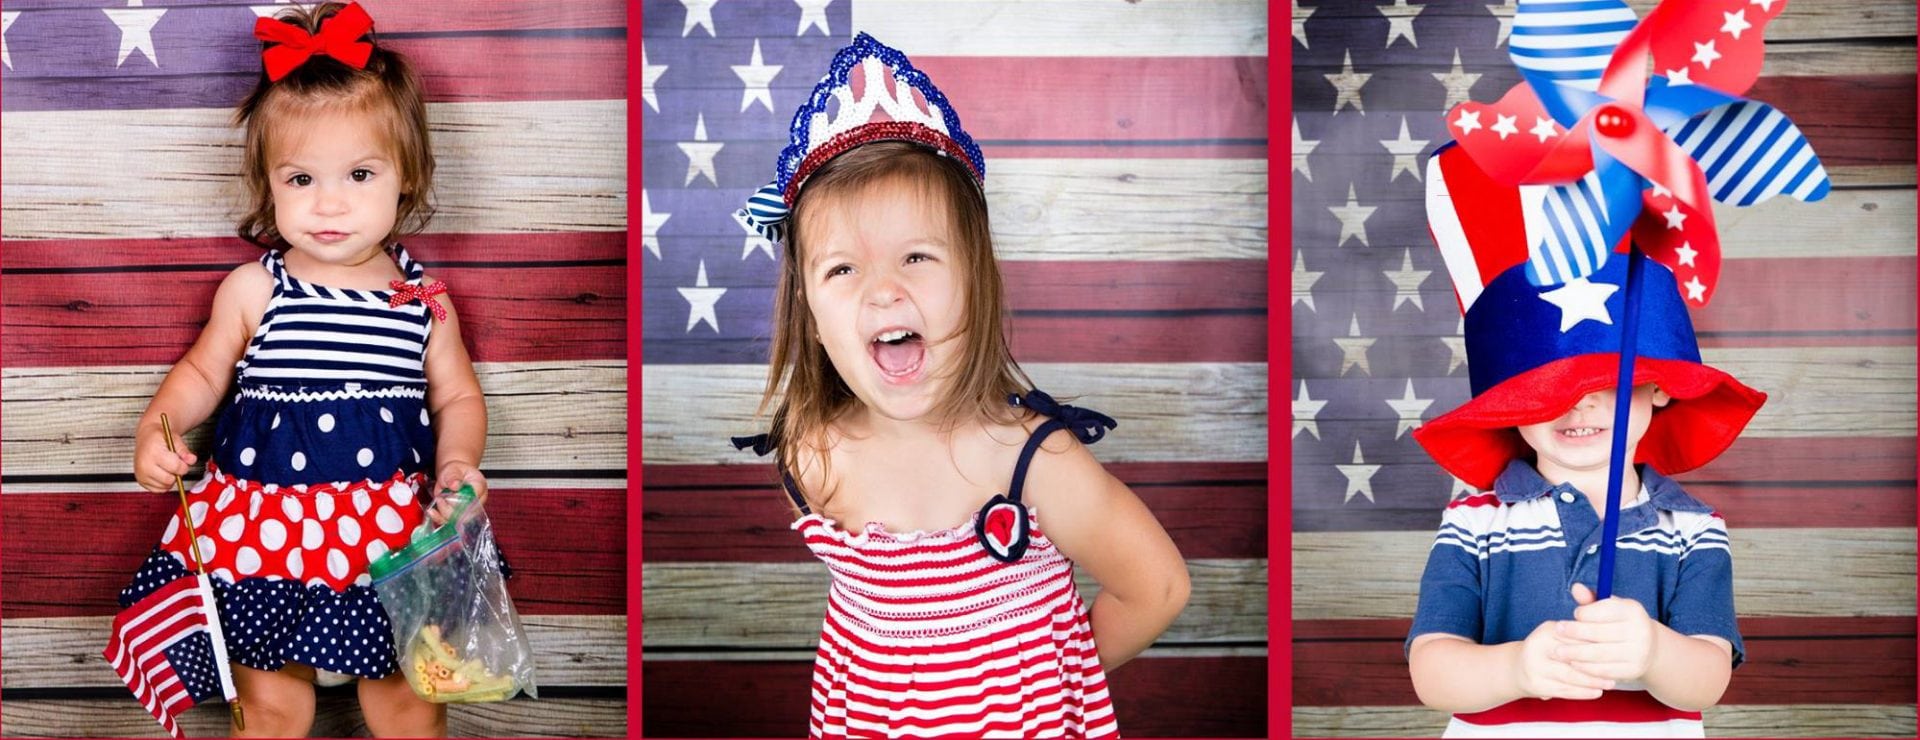 Americana Picnic Monthly Mini Sessions 4th of July themed at the Moments & Milestones Studio!